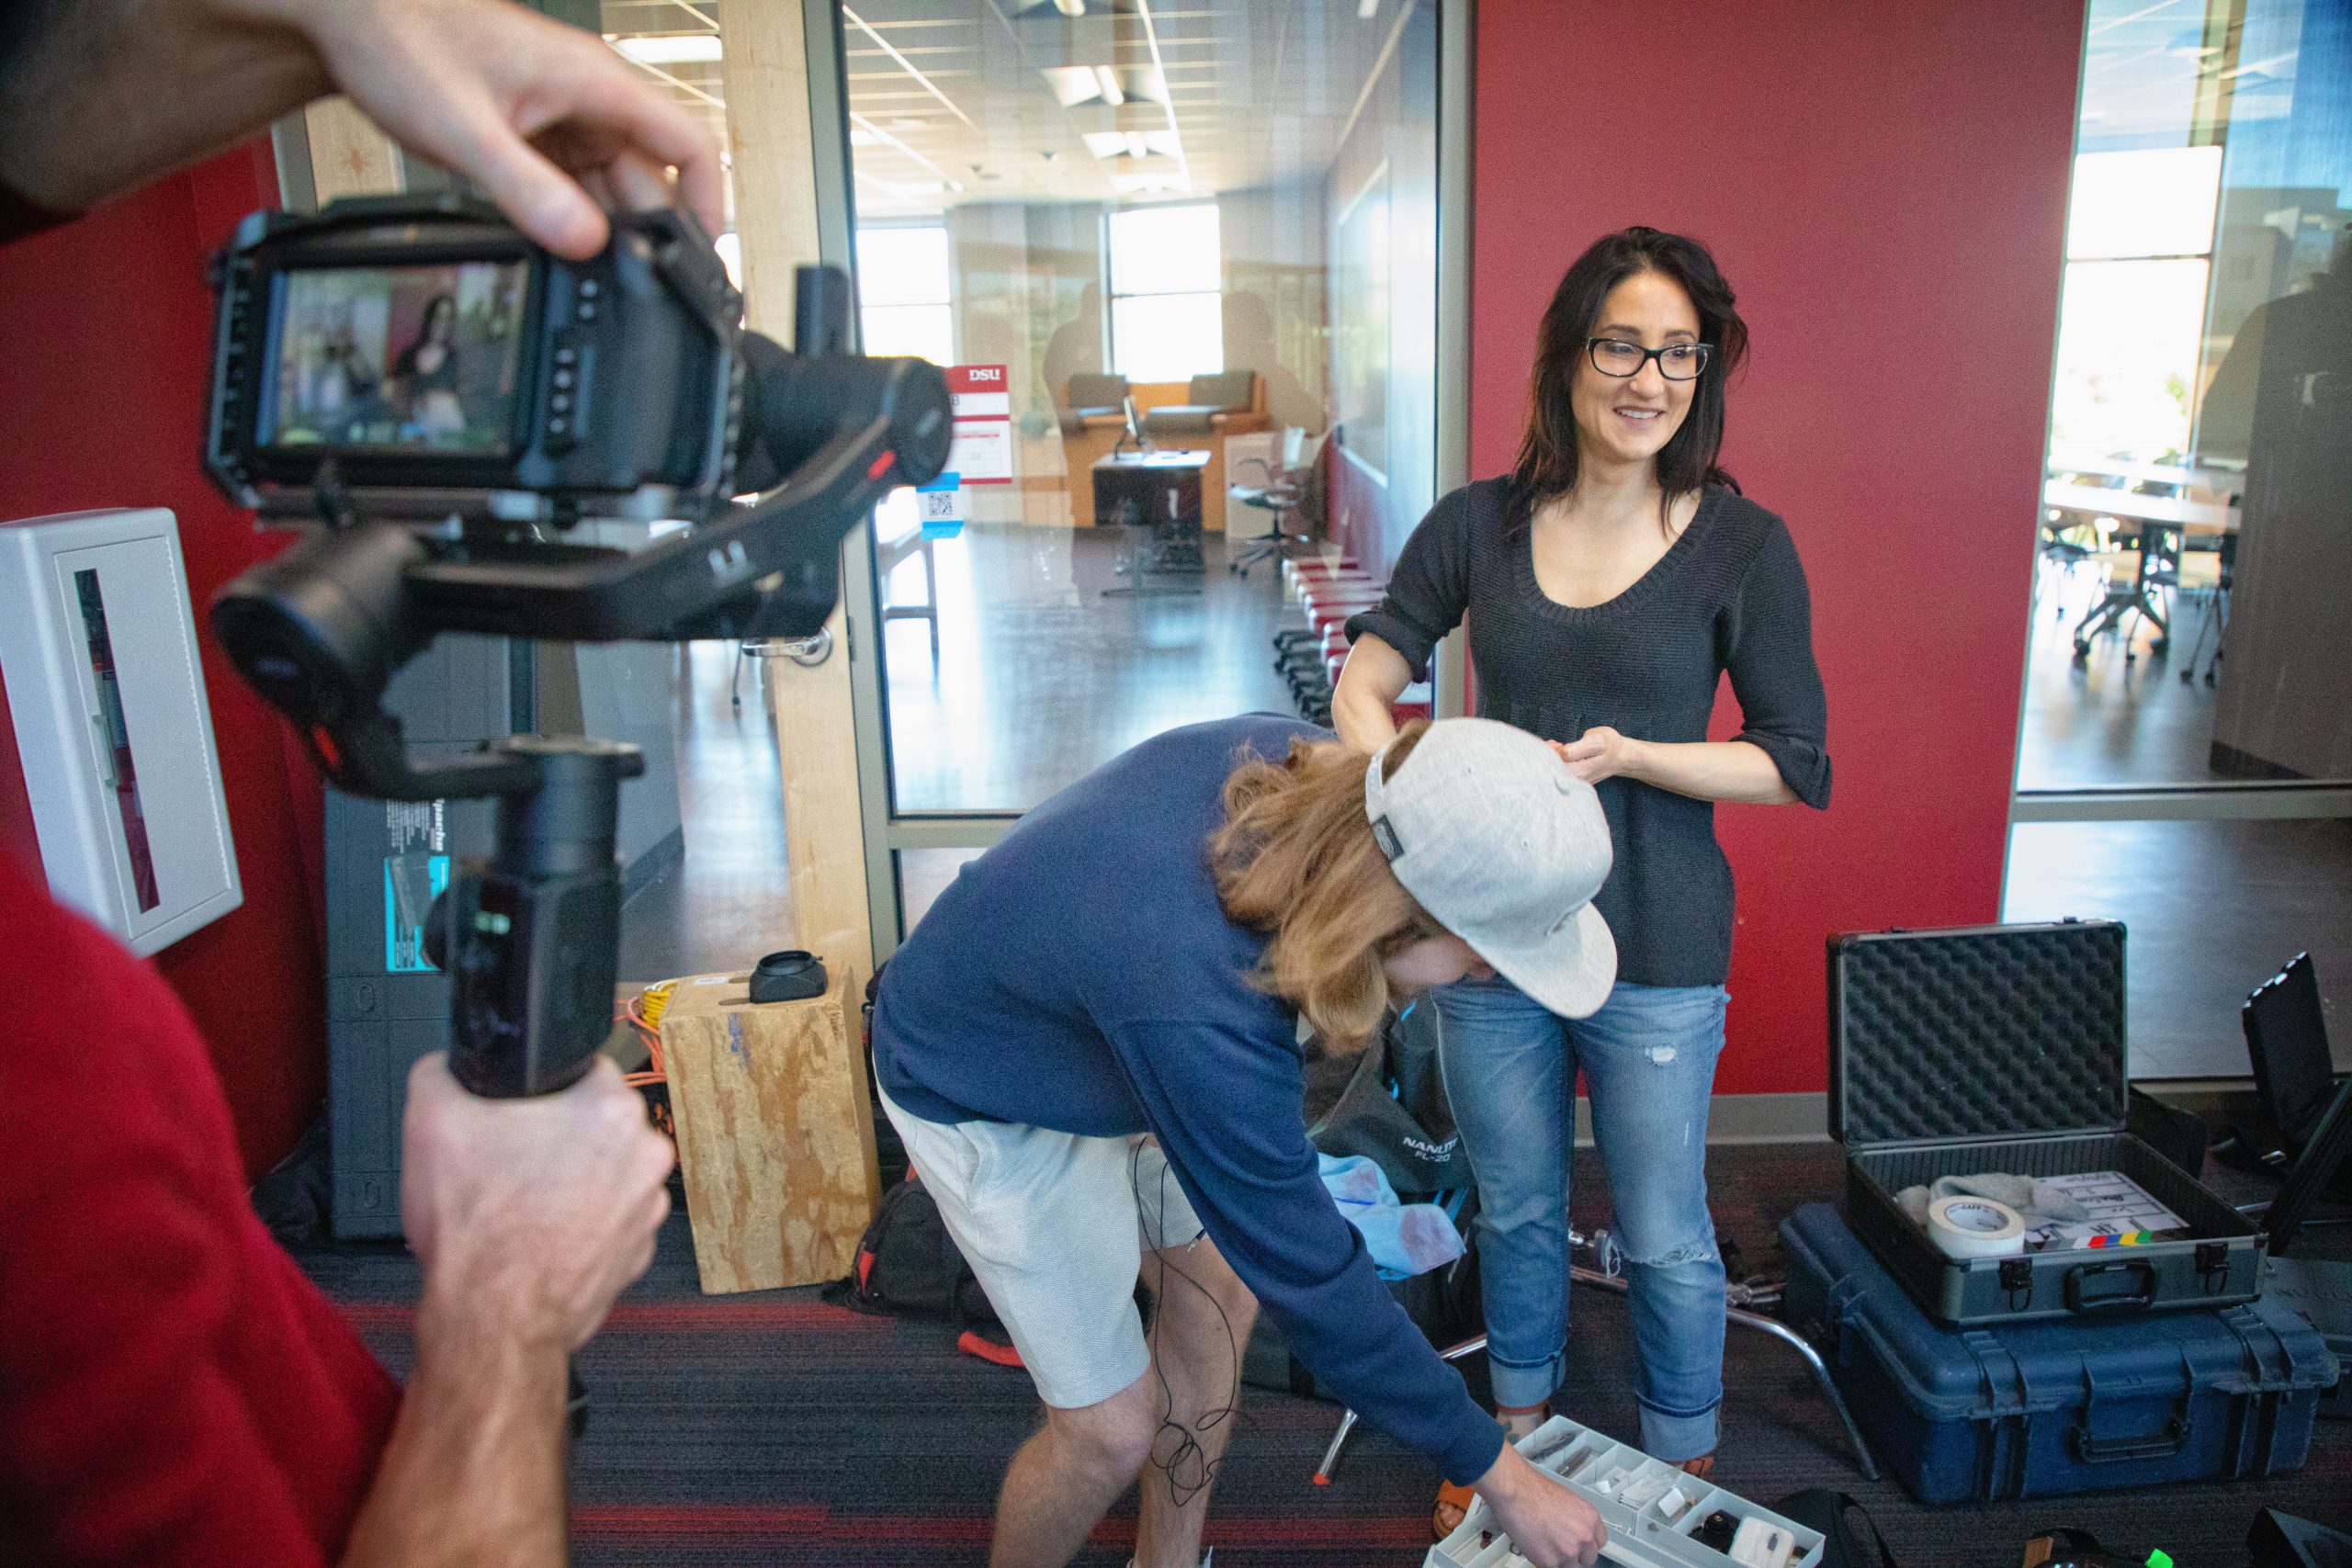 DOCUTAH provides students with hands-on polytechnic experiences